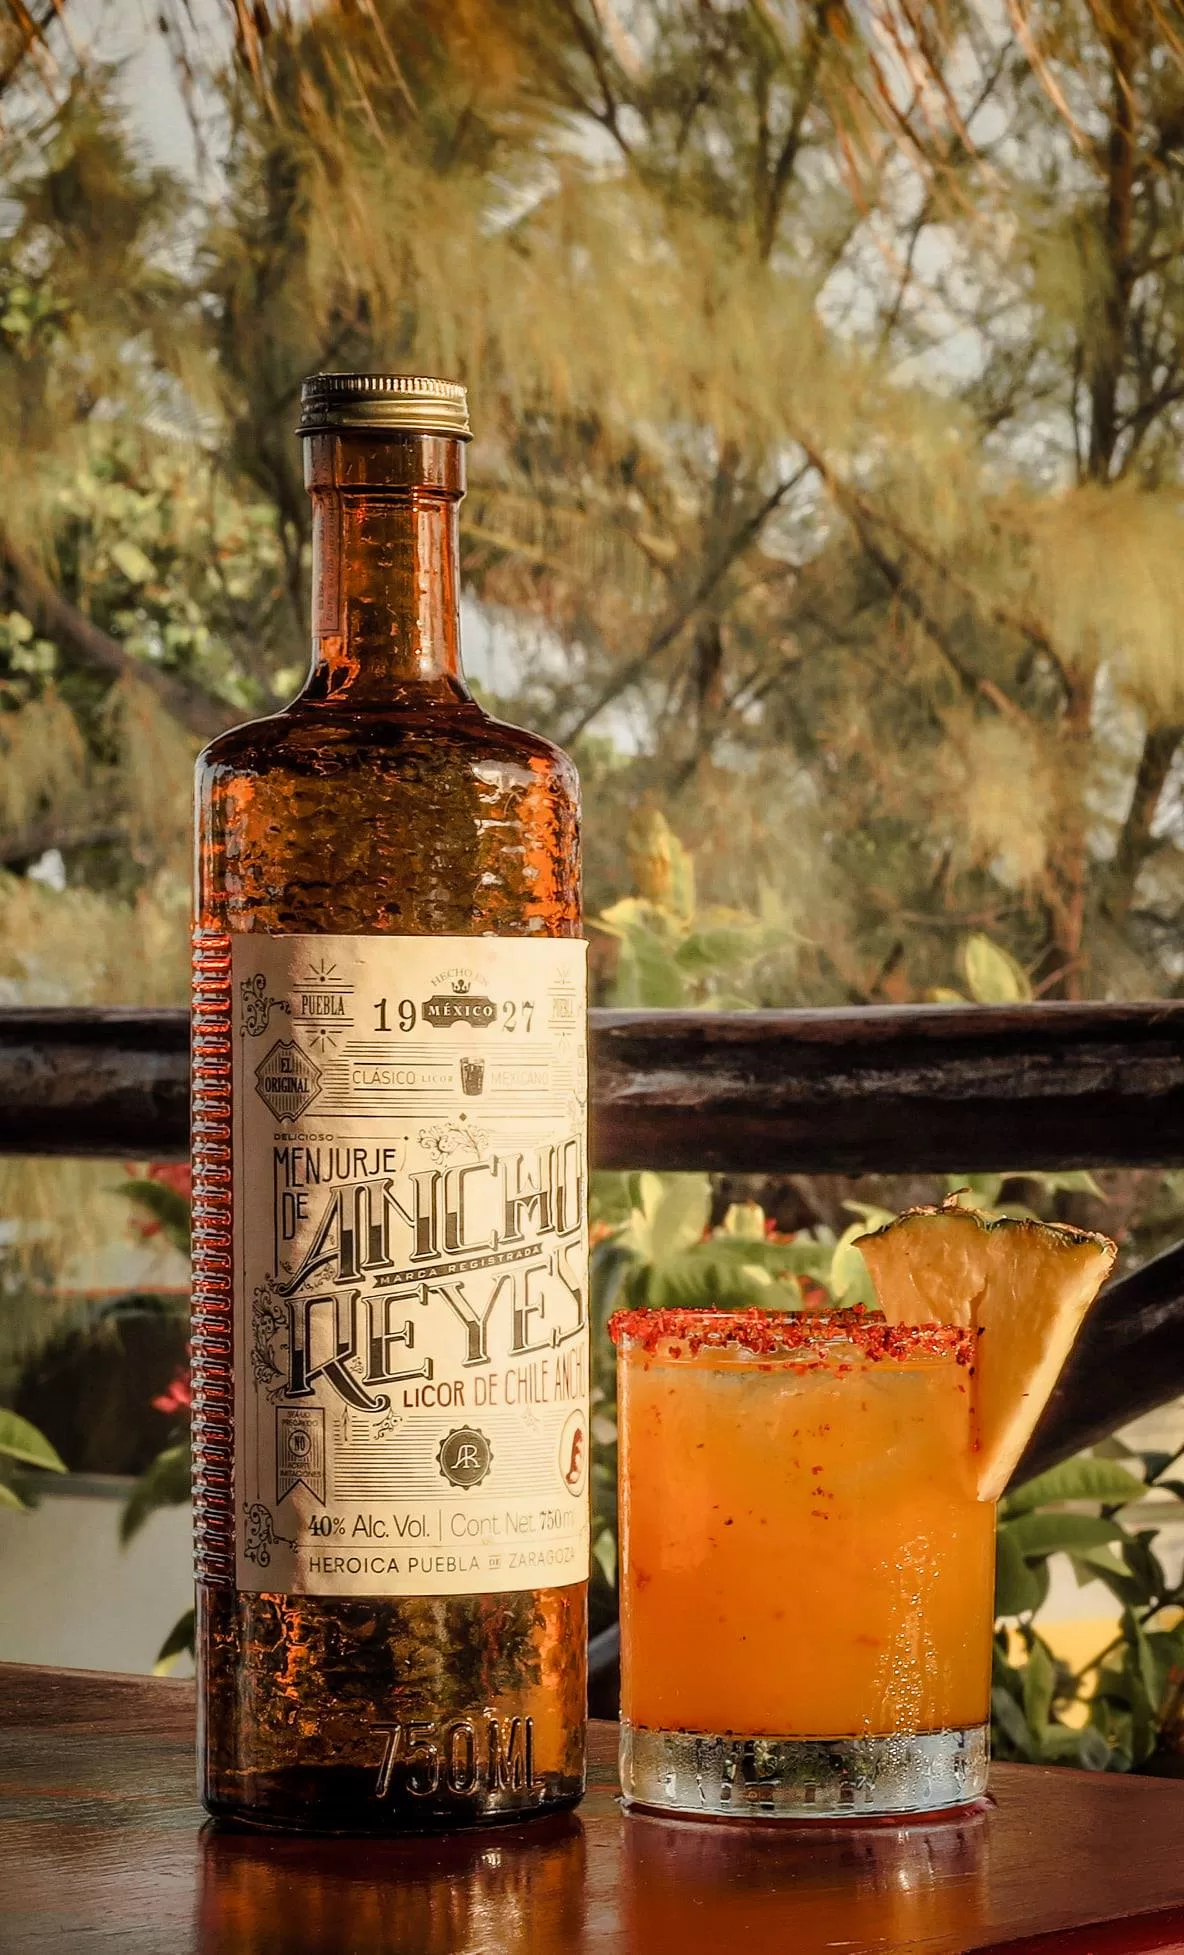 Ancho Reyes Mezcal bottle and a refreshing passion fruit drink called the "Reyes del Puerto" served at La Sirena.